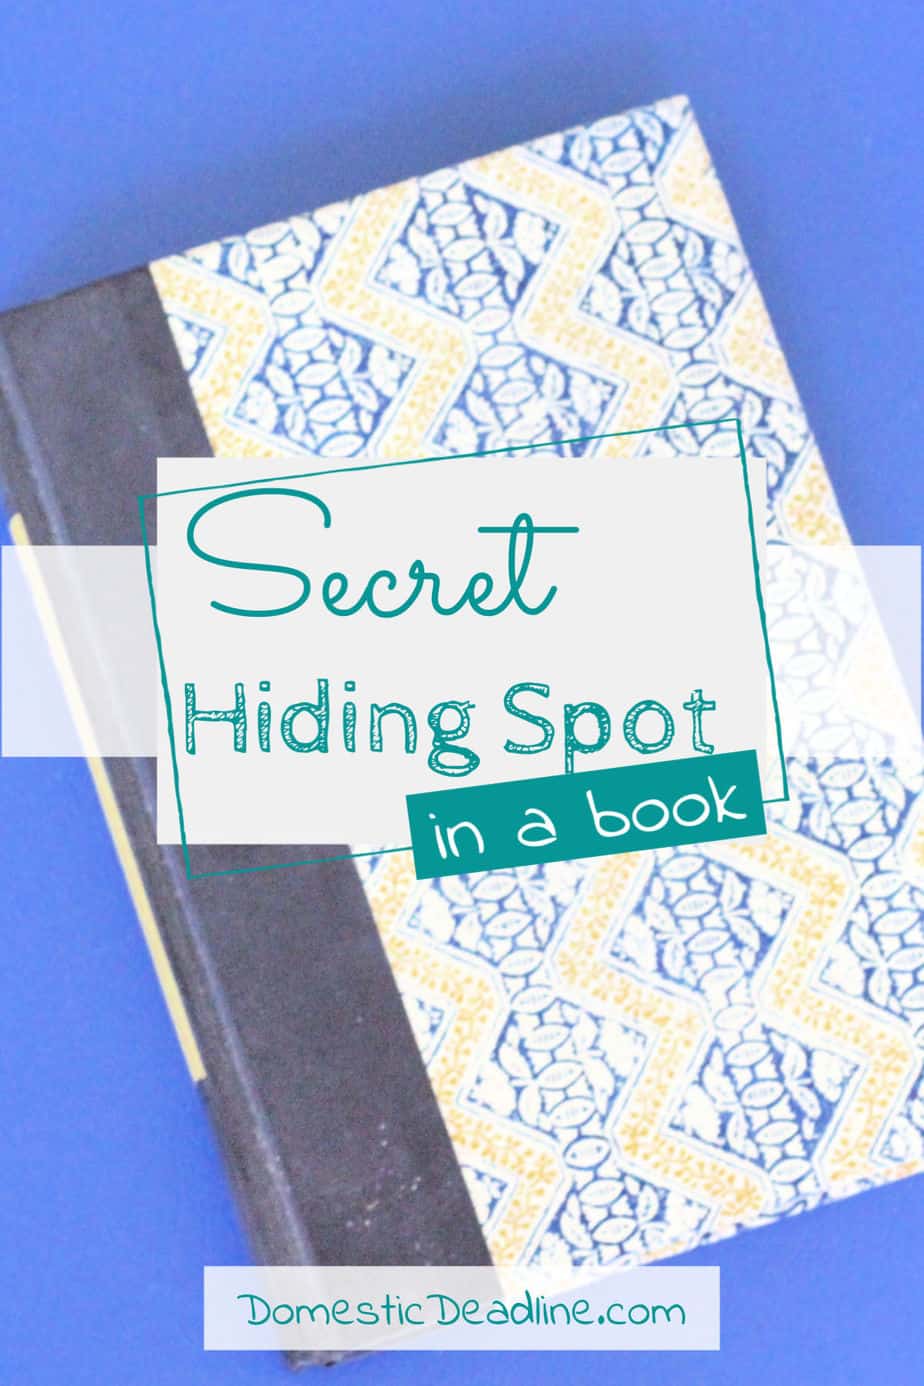 Learn how easy it is to turn a beautiful old book into a secret hiding spot. Old Reader's Digest books are beautiful to display and store something inside! DomesticDeadline.com